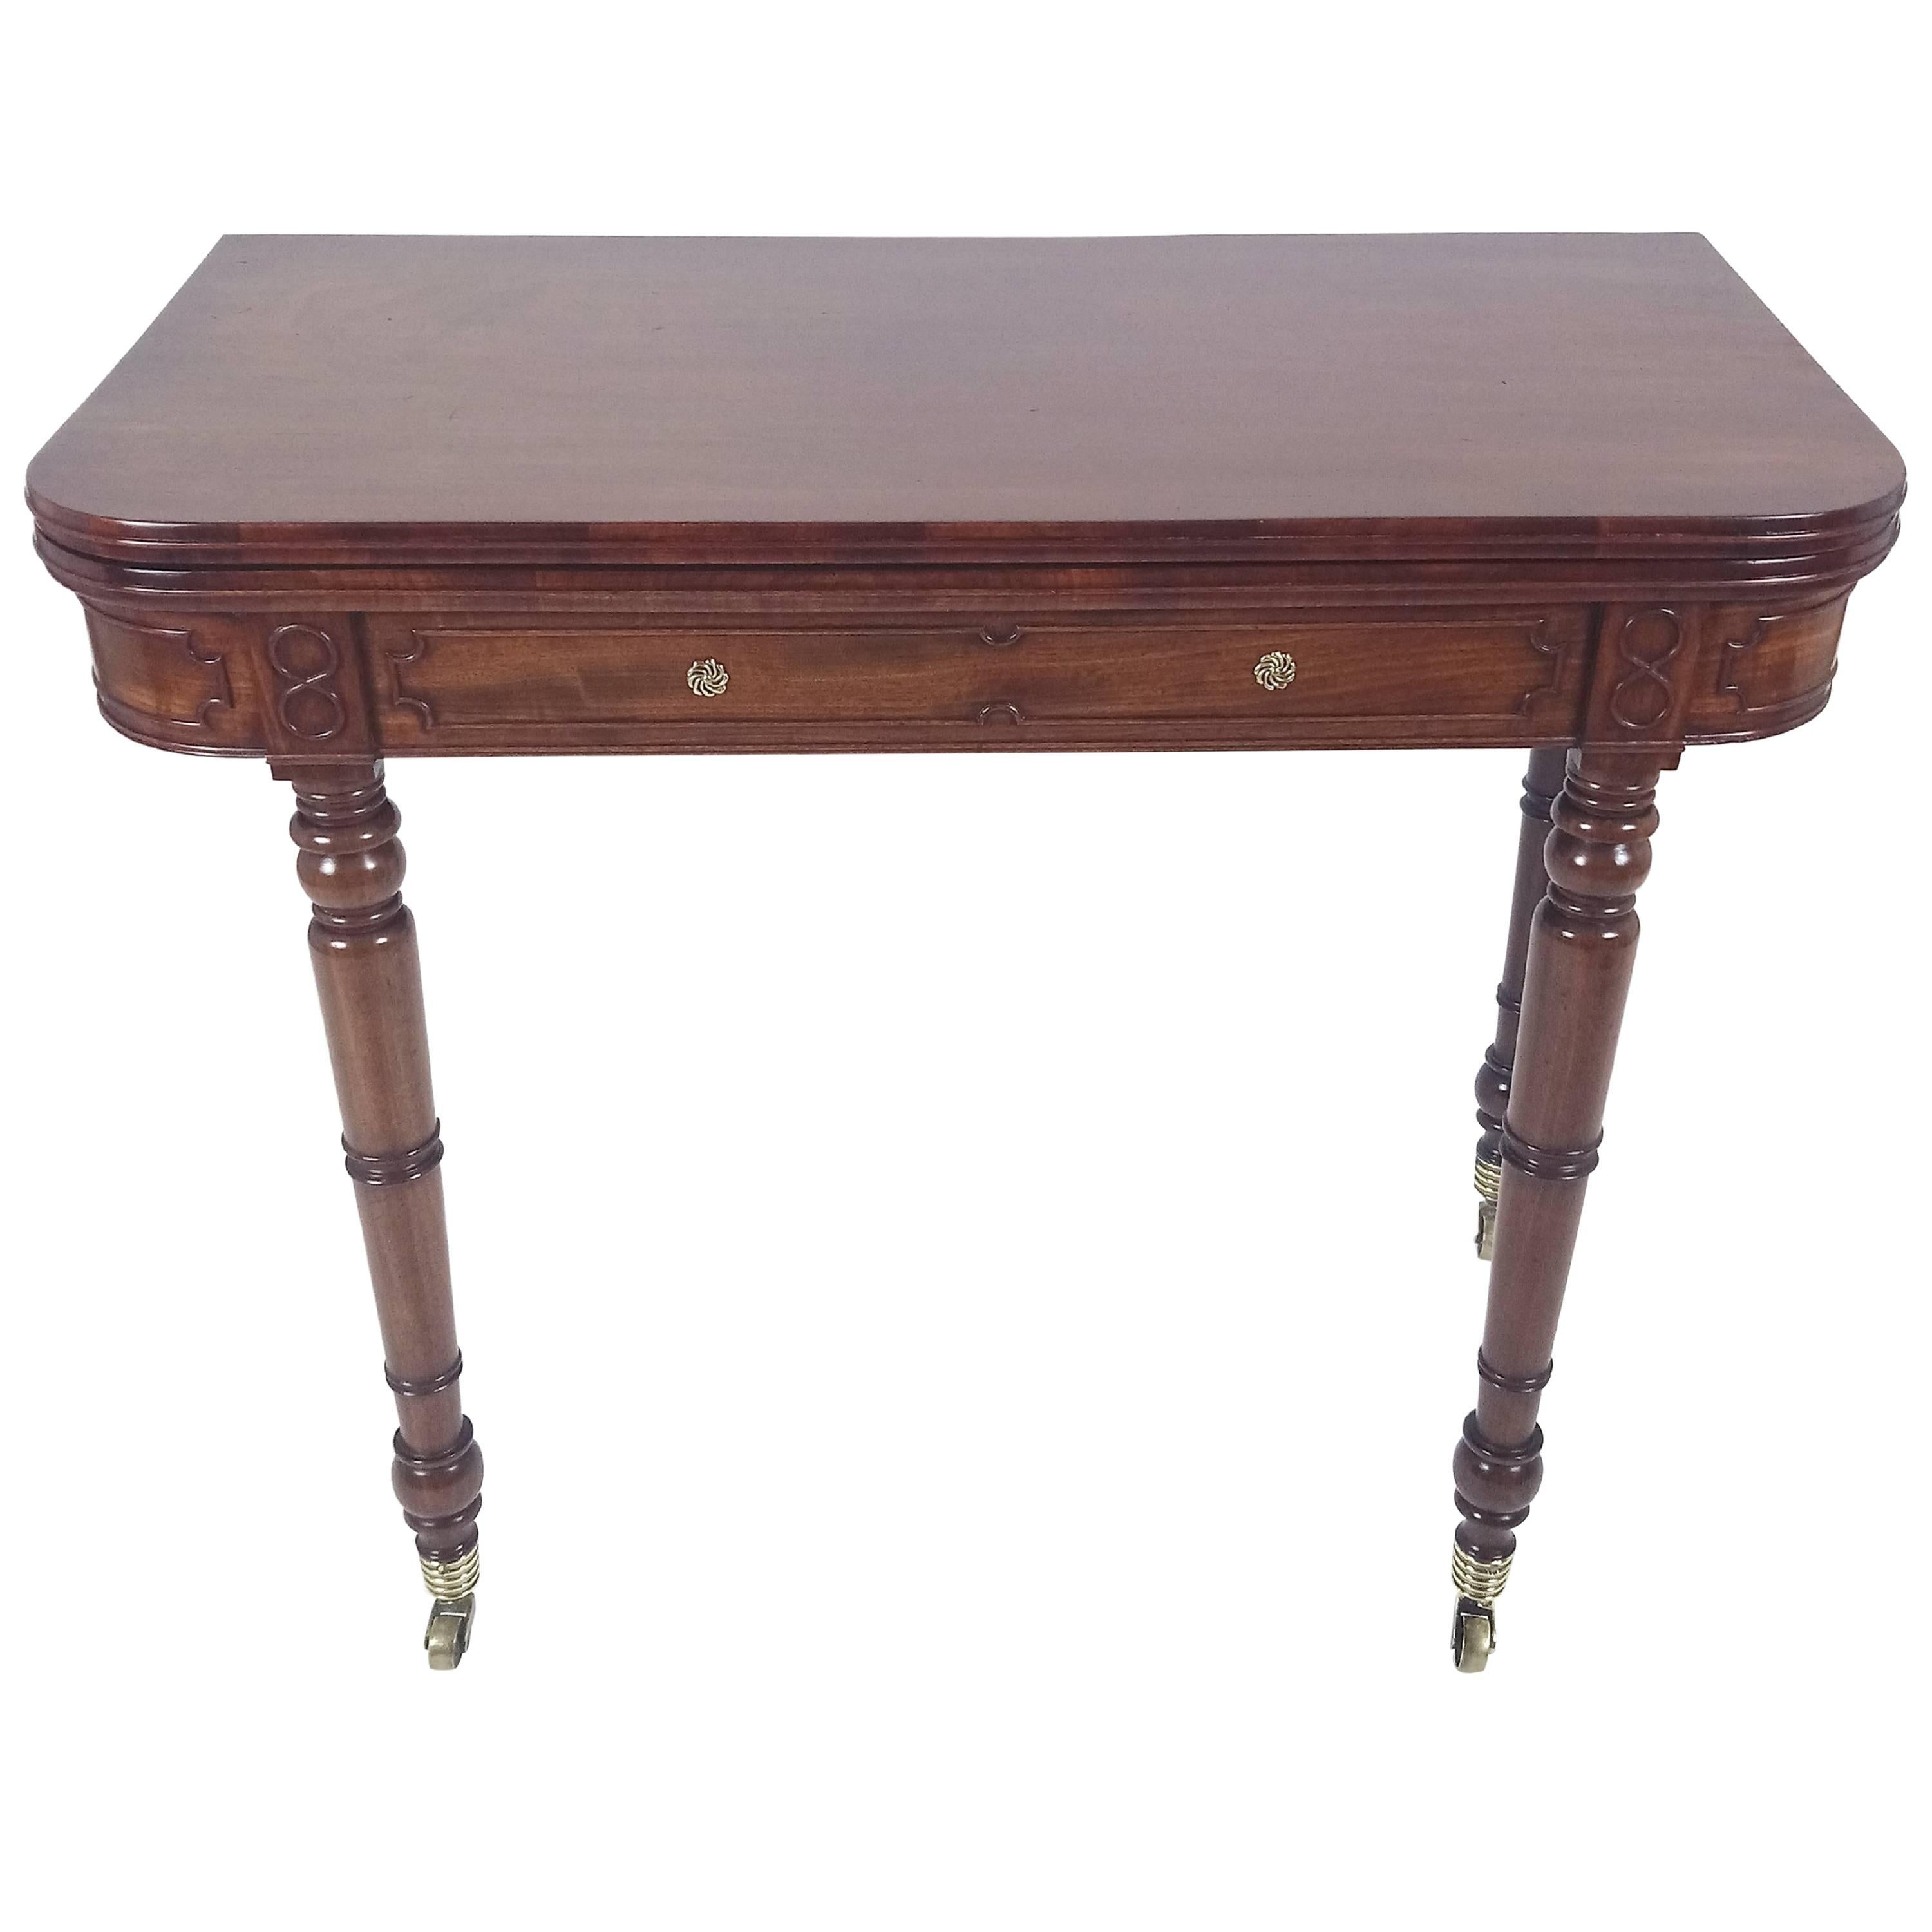 Regency Mahogany Fold over Games Table in the Manner of Gillows